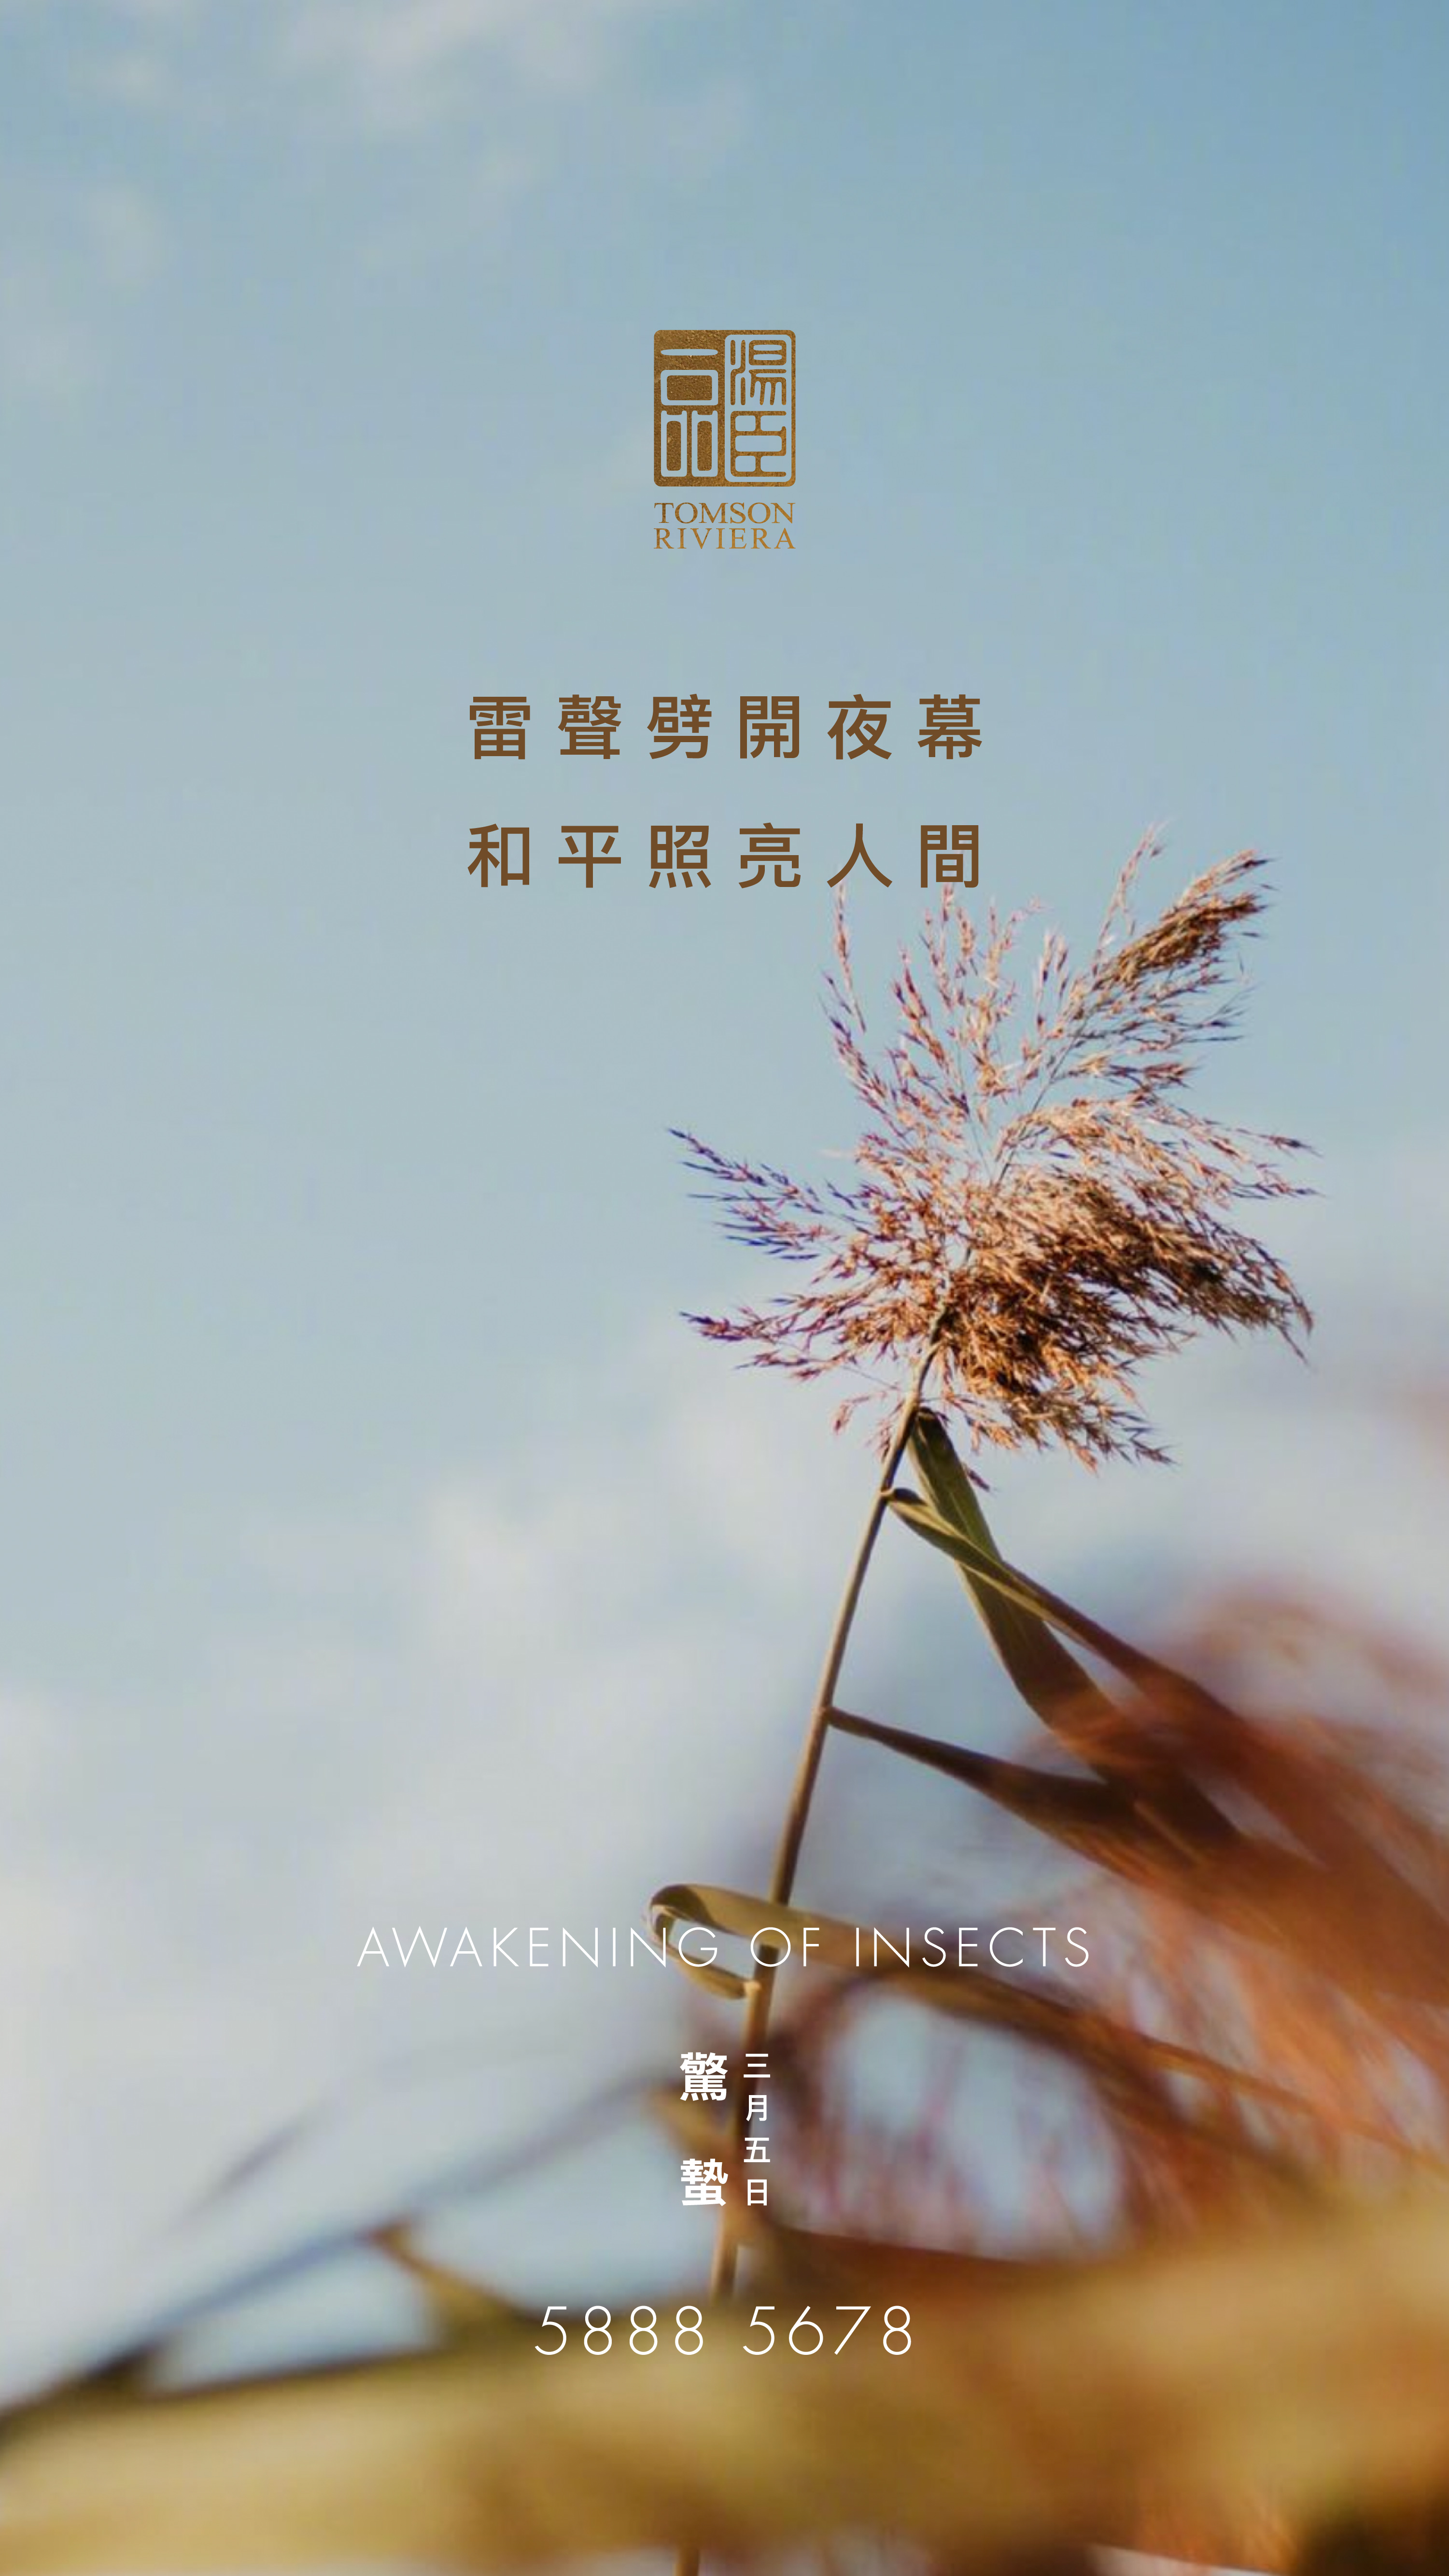 Awakening of Insects